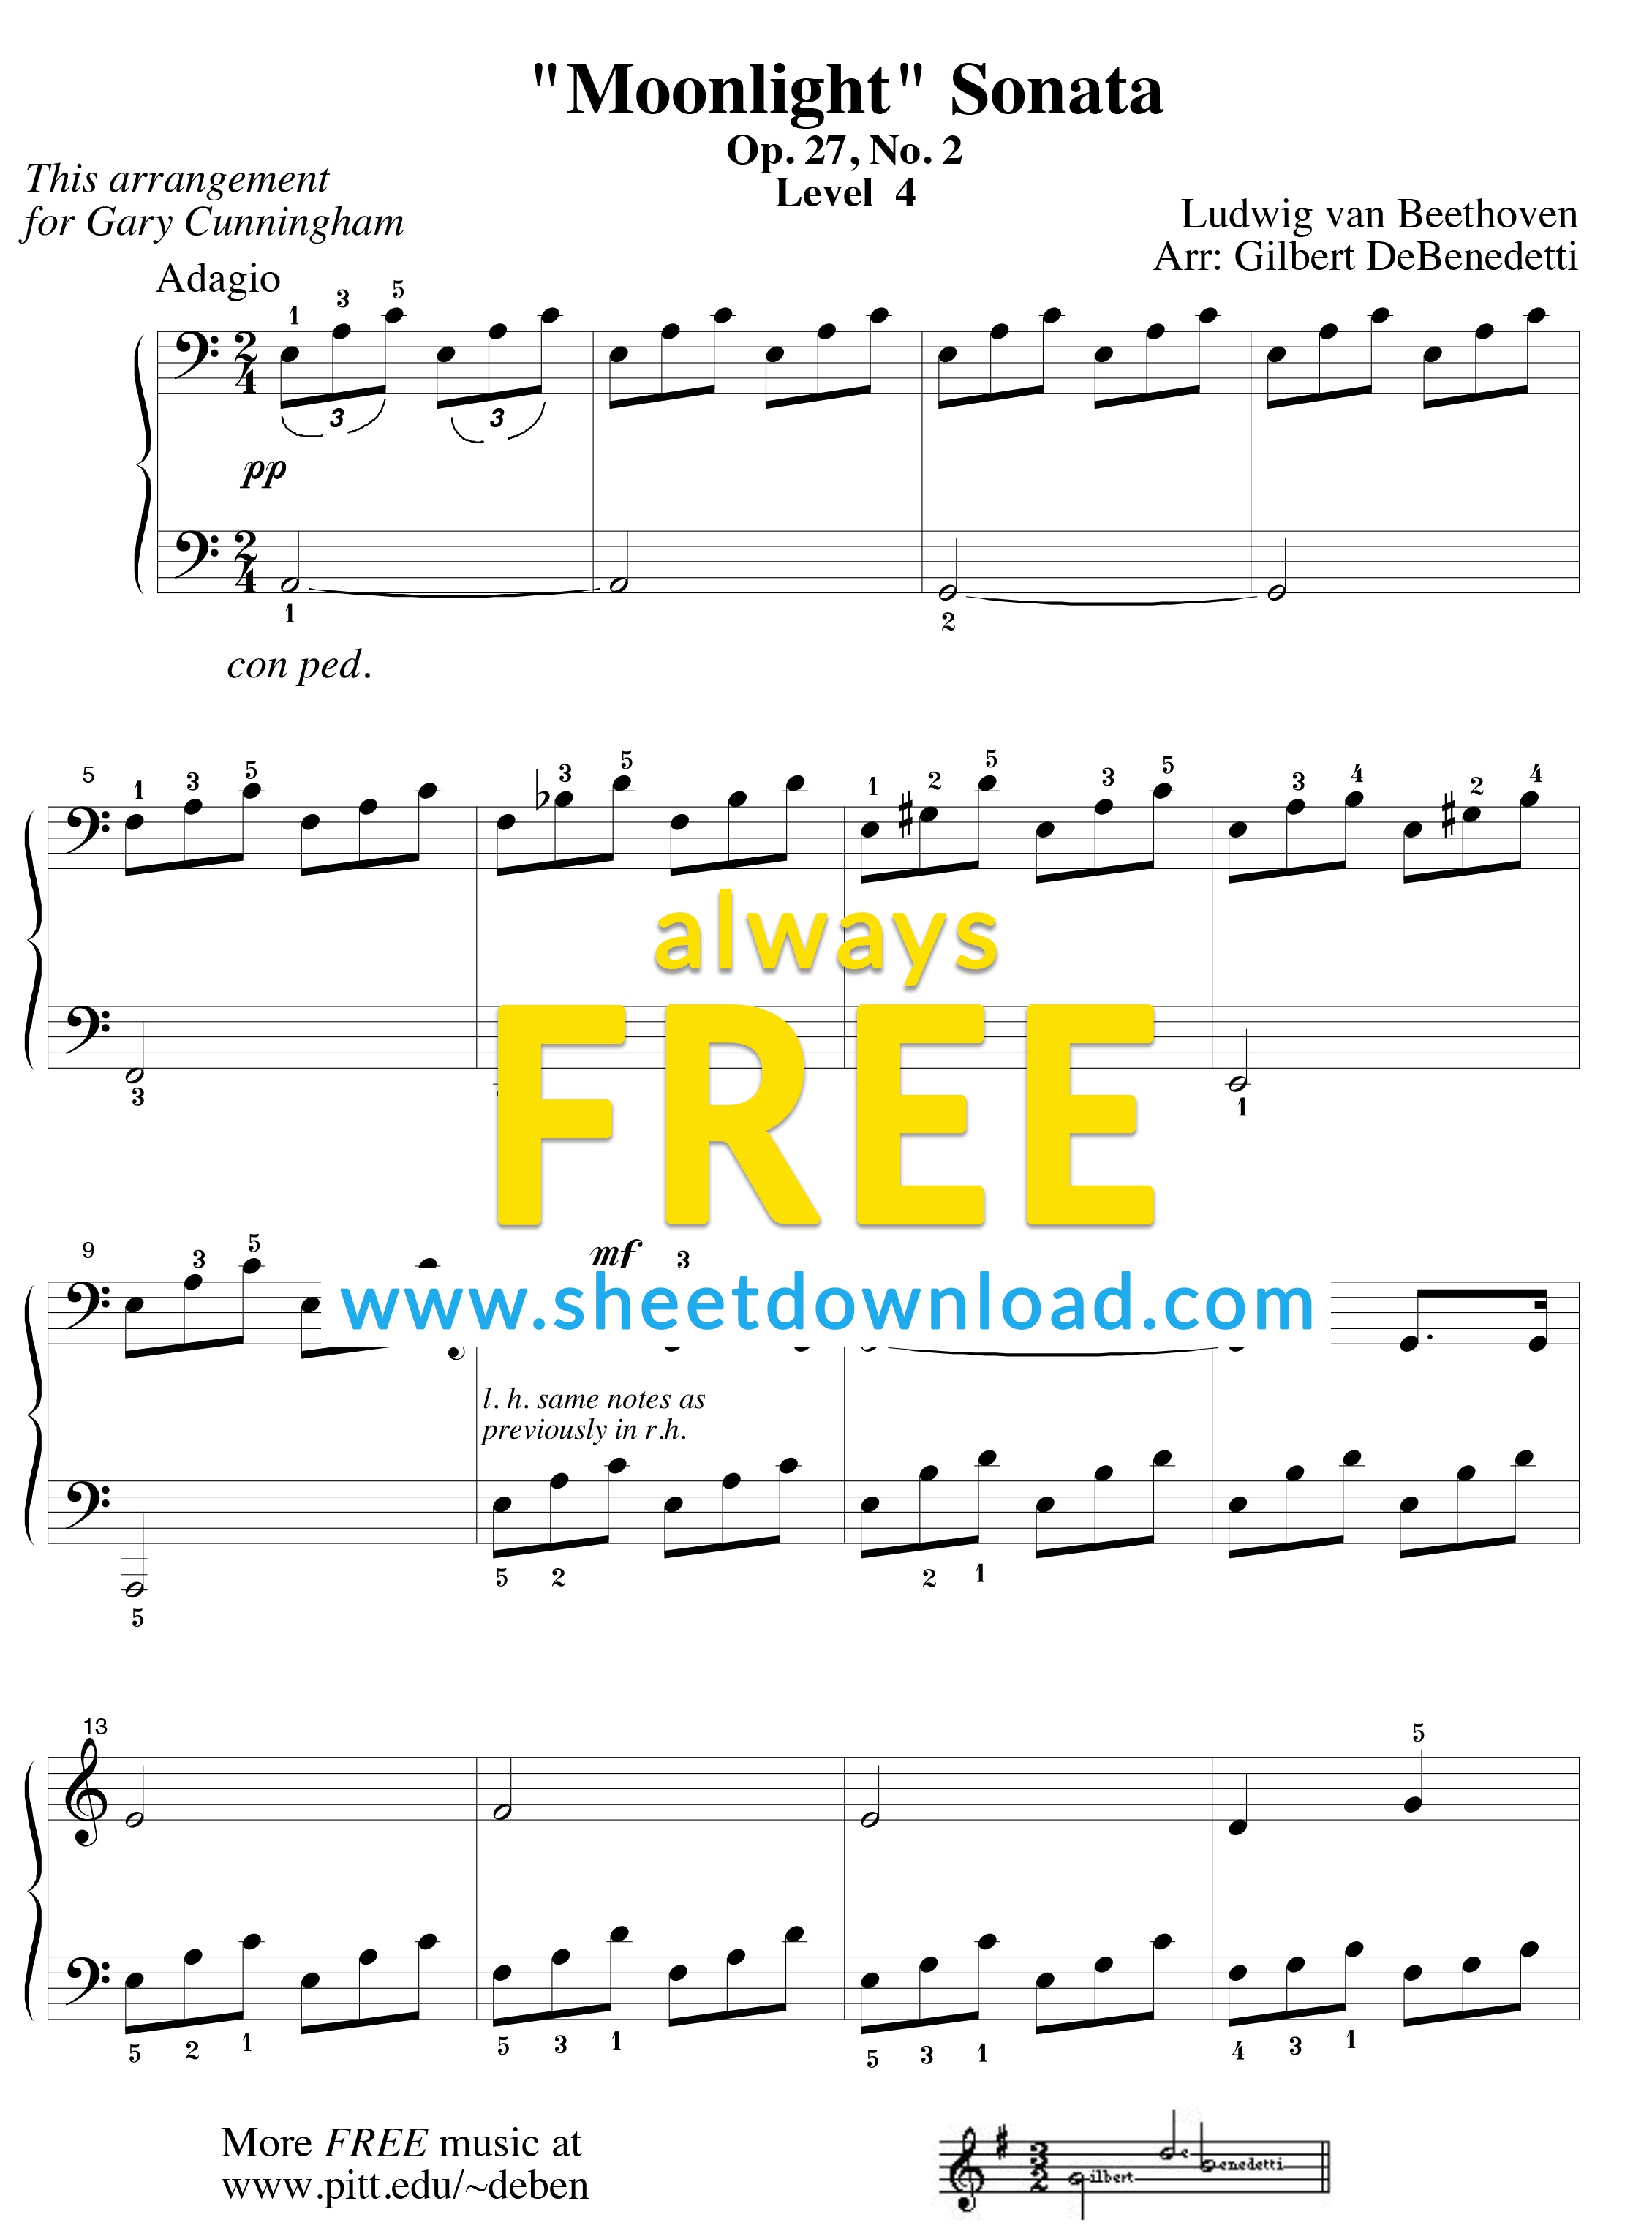 Top 100 Popular Piano Sheets Downloaded From Sheetdownload - Piano Sheet Music For Beginners Popular Songs Free Printable